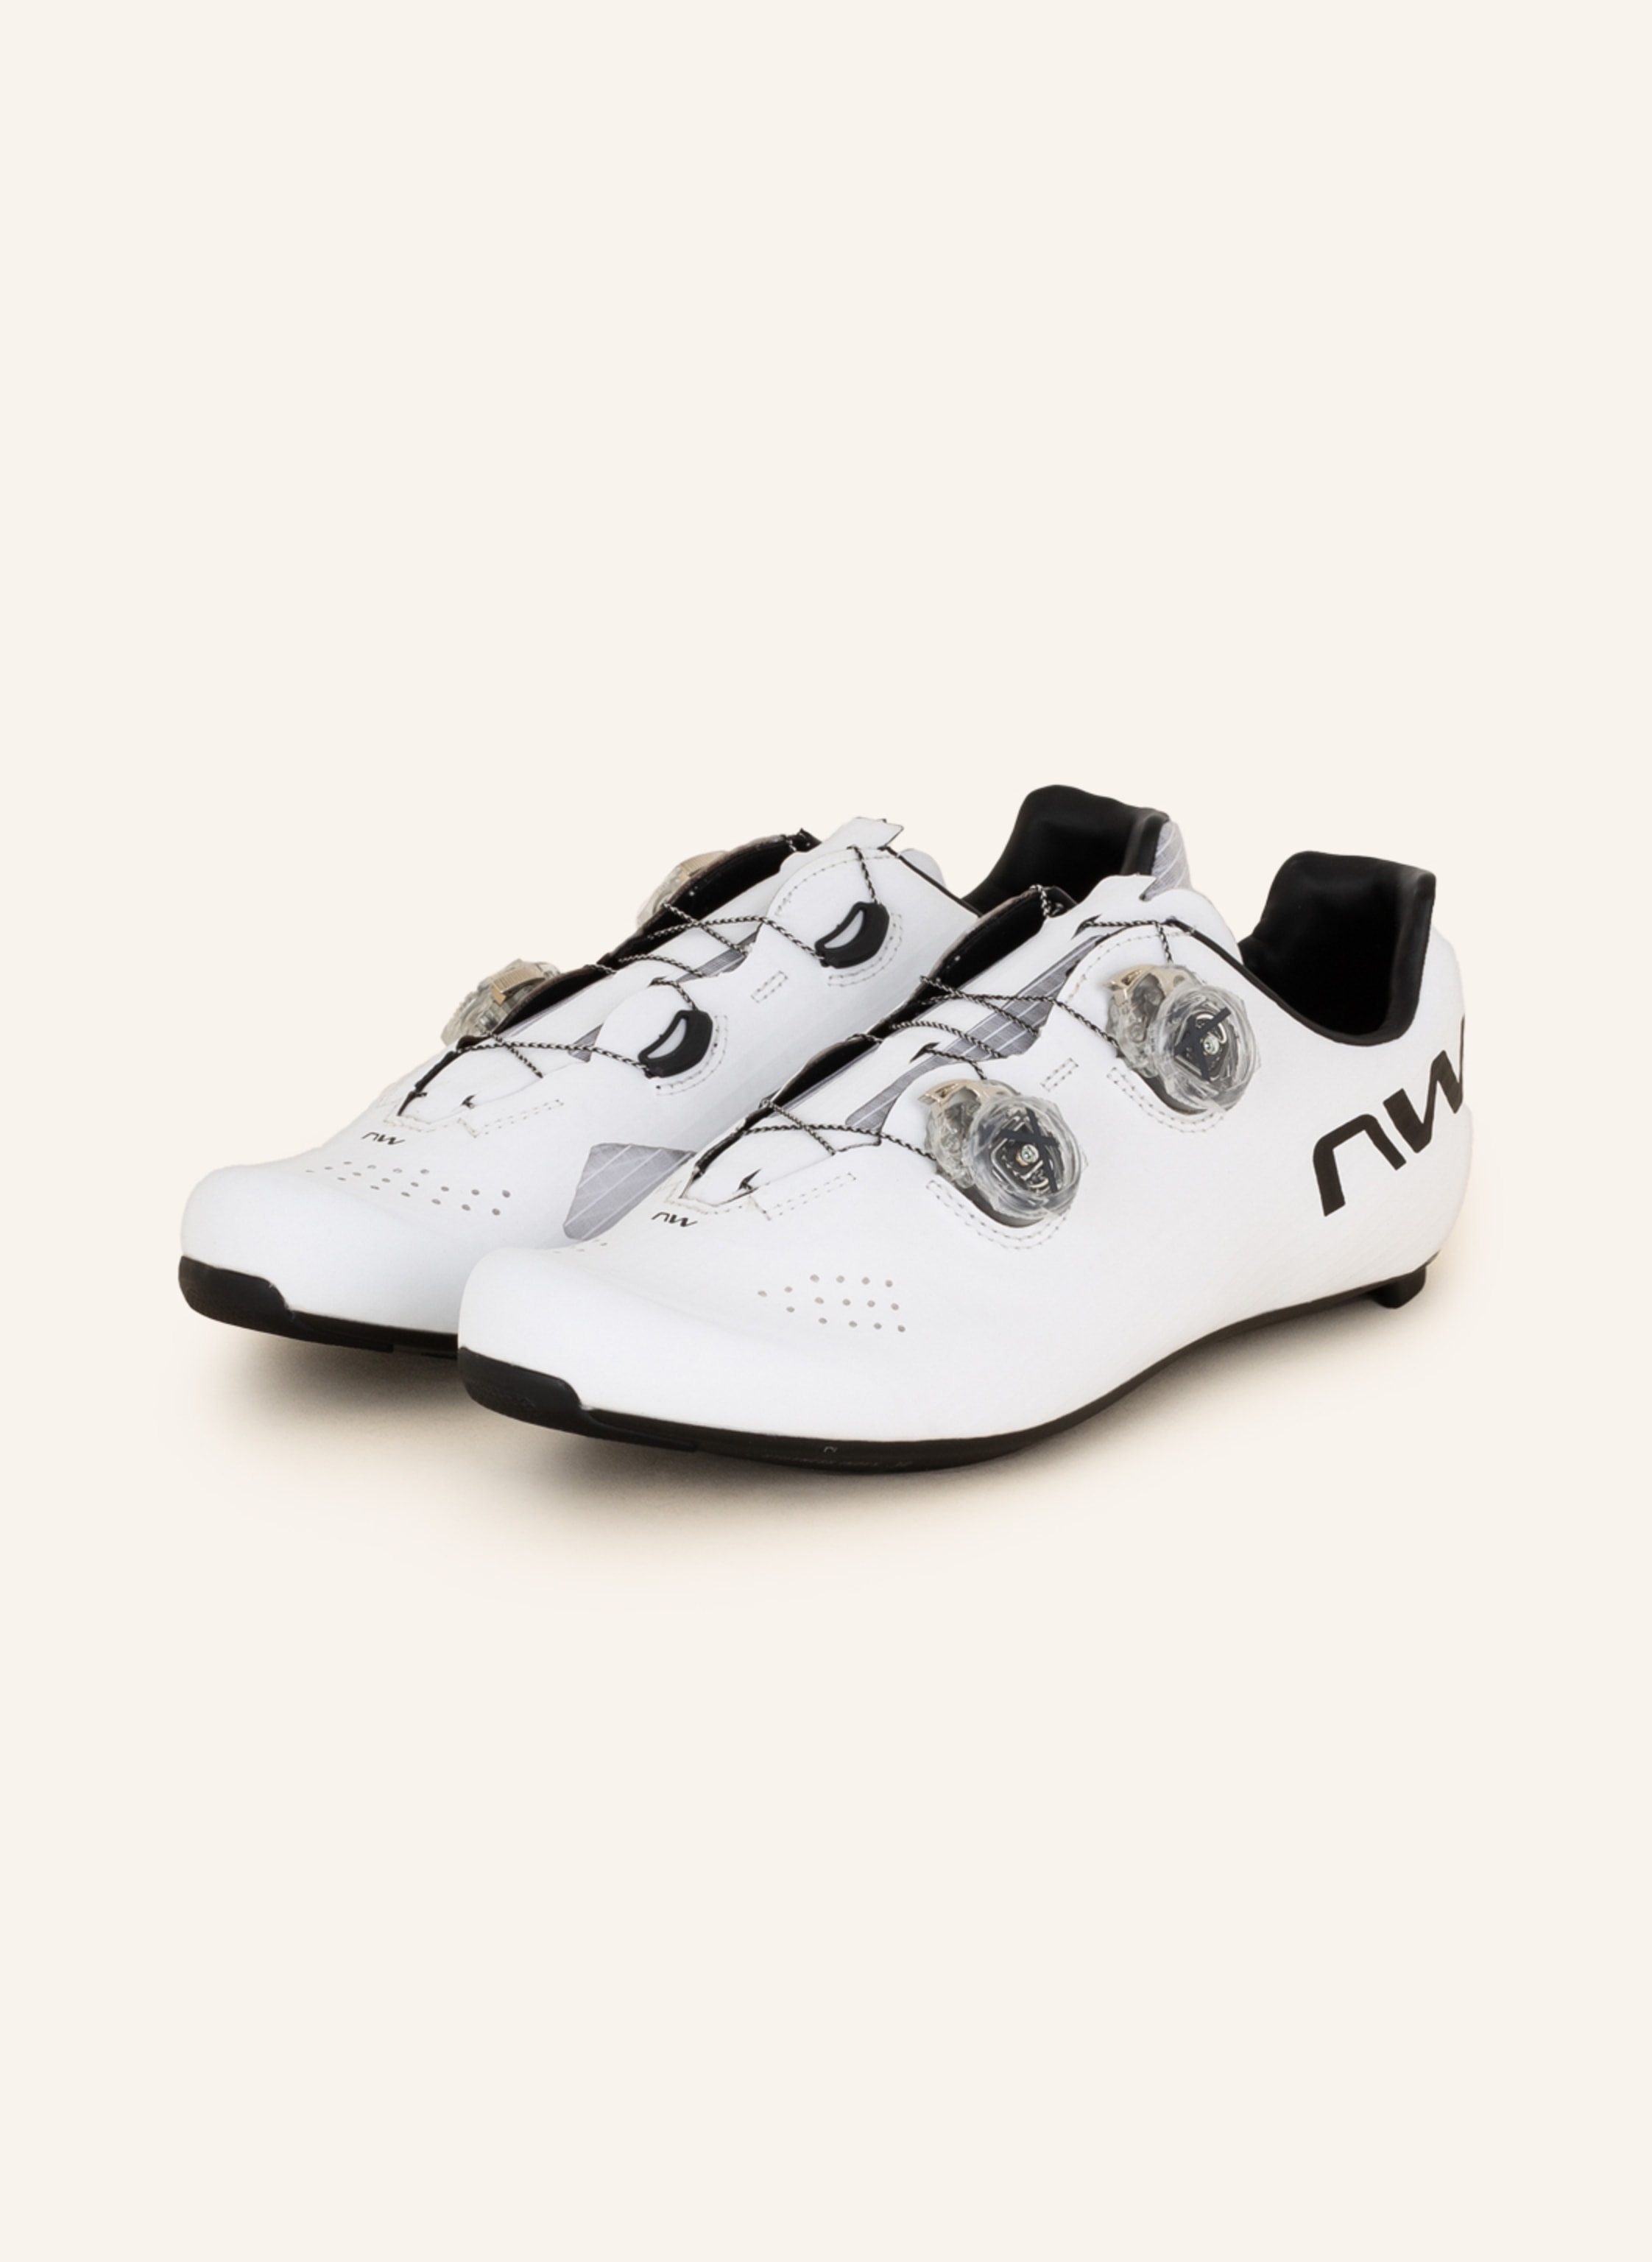 Optimaal afstand compleet northwave Road bike shoes EXTREME GT 4 in white | Breuninger